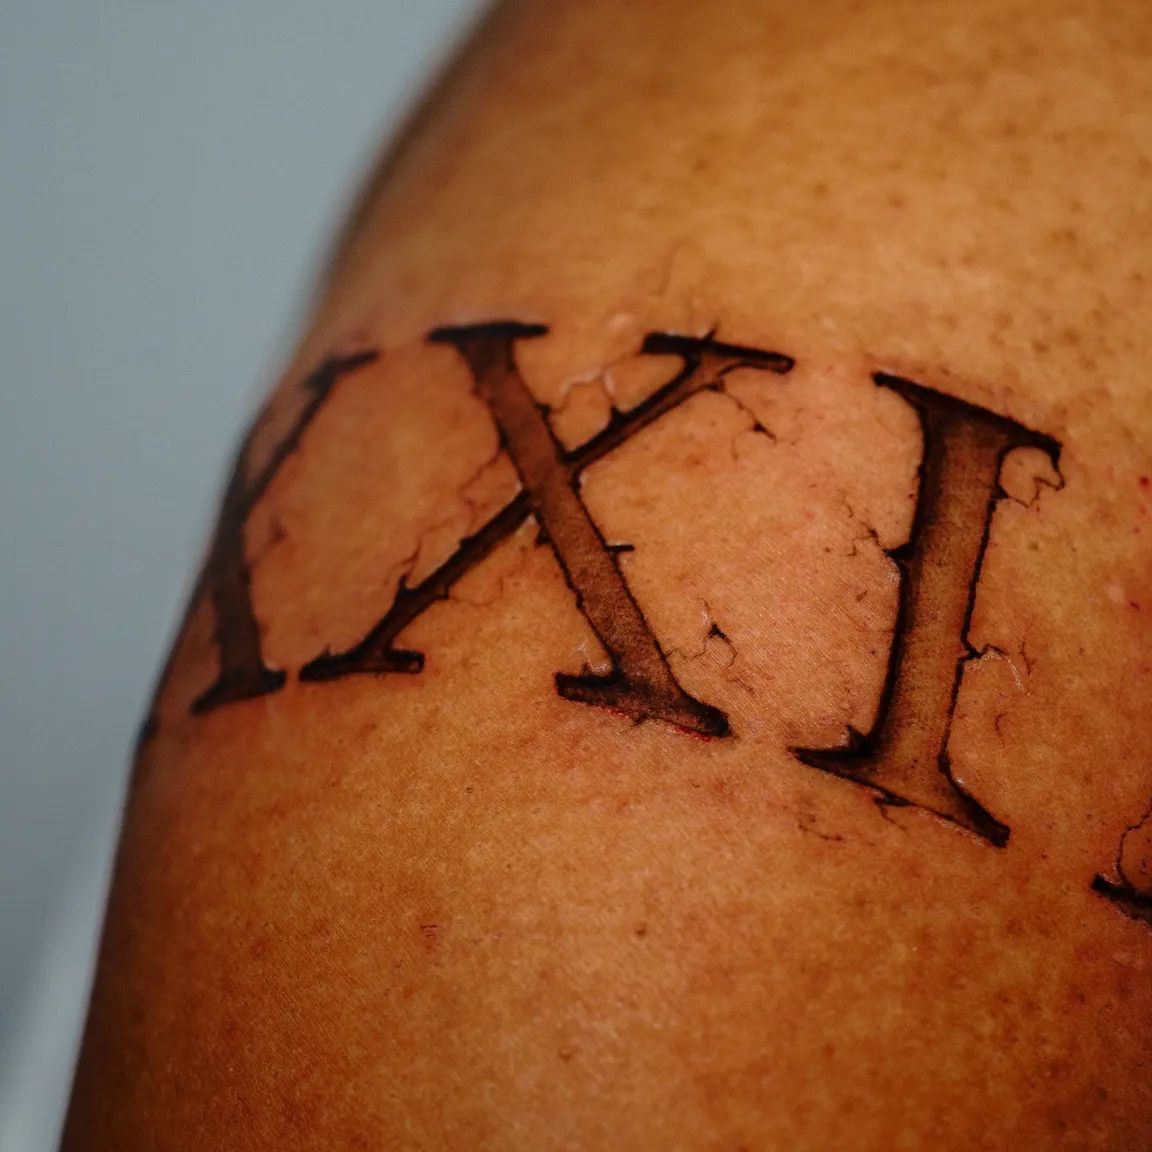 Stunning Roman Numeral Tattoos for People Looking for Some Classic Ink ...